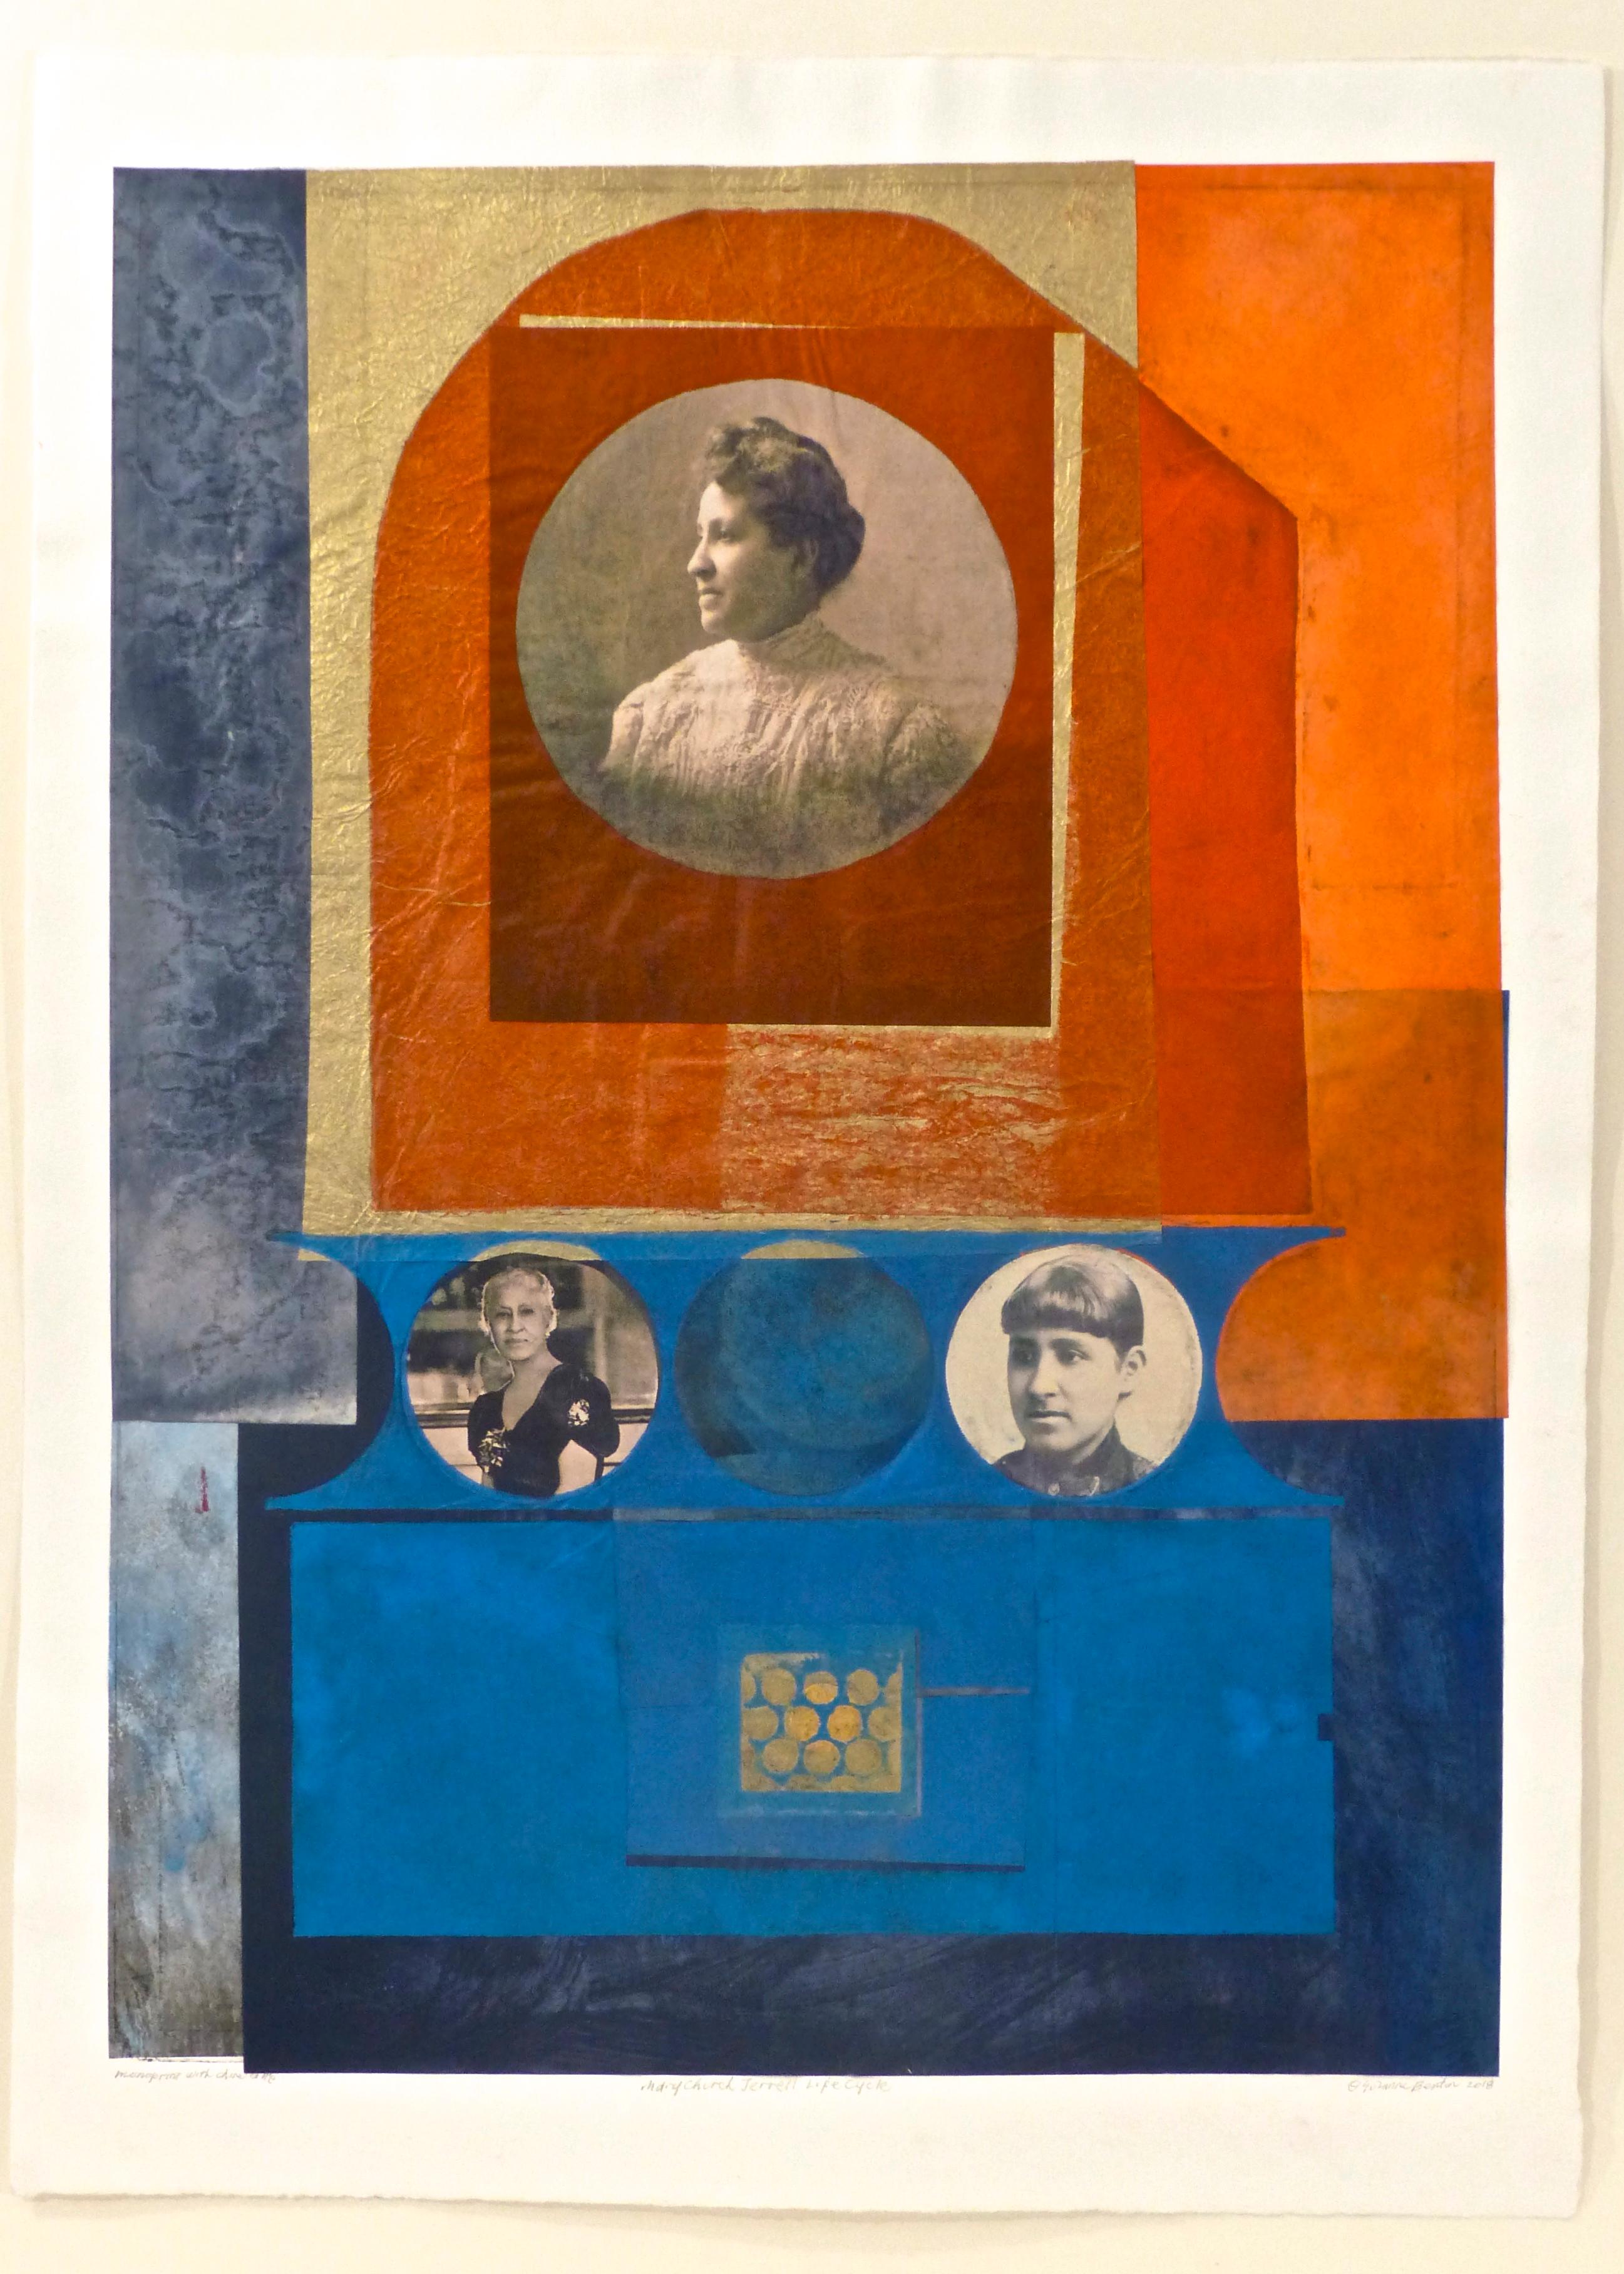 Benton_Mary Church Terrell Life Cycle_monoprint, collage, Oberlin College Women - Mixed Media Art by Suzanne Benton